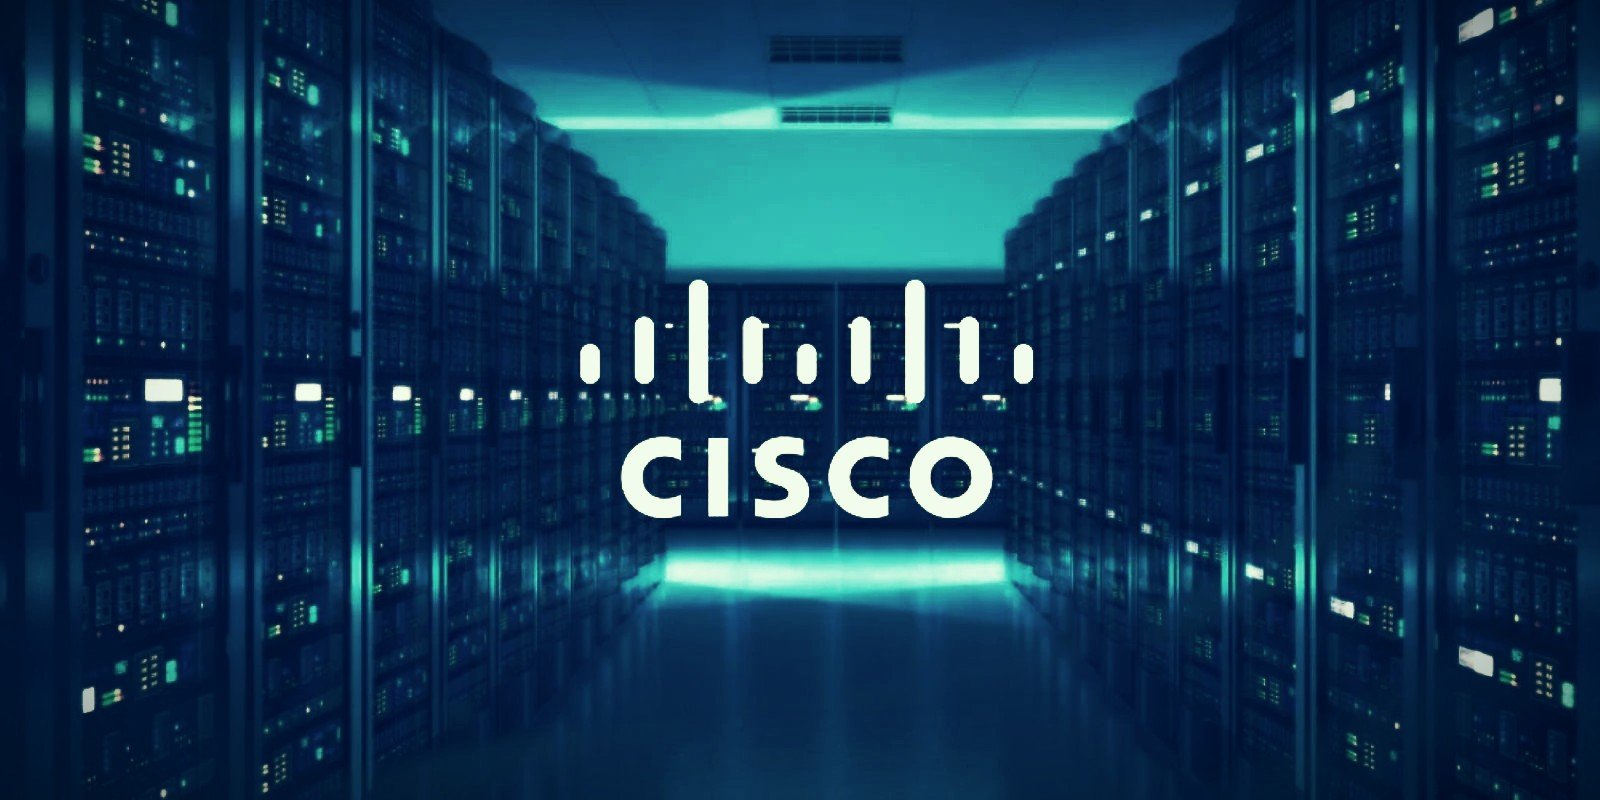 What Is The Best Paying Cisco Certification Track?